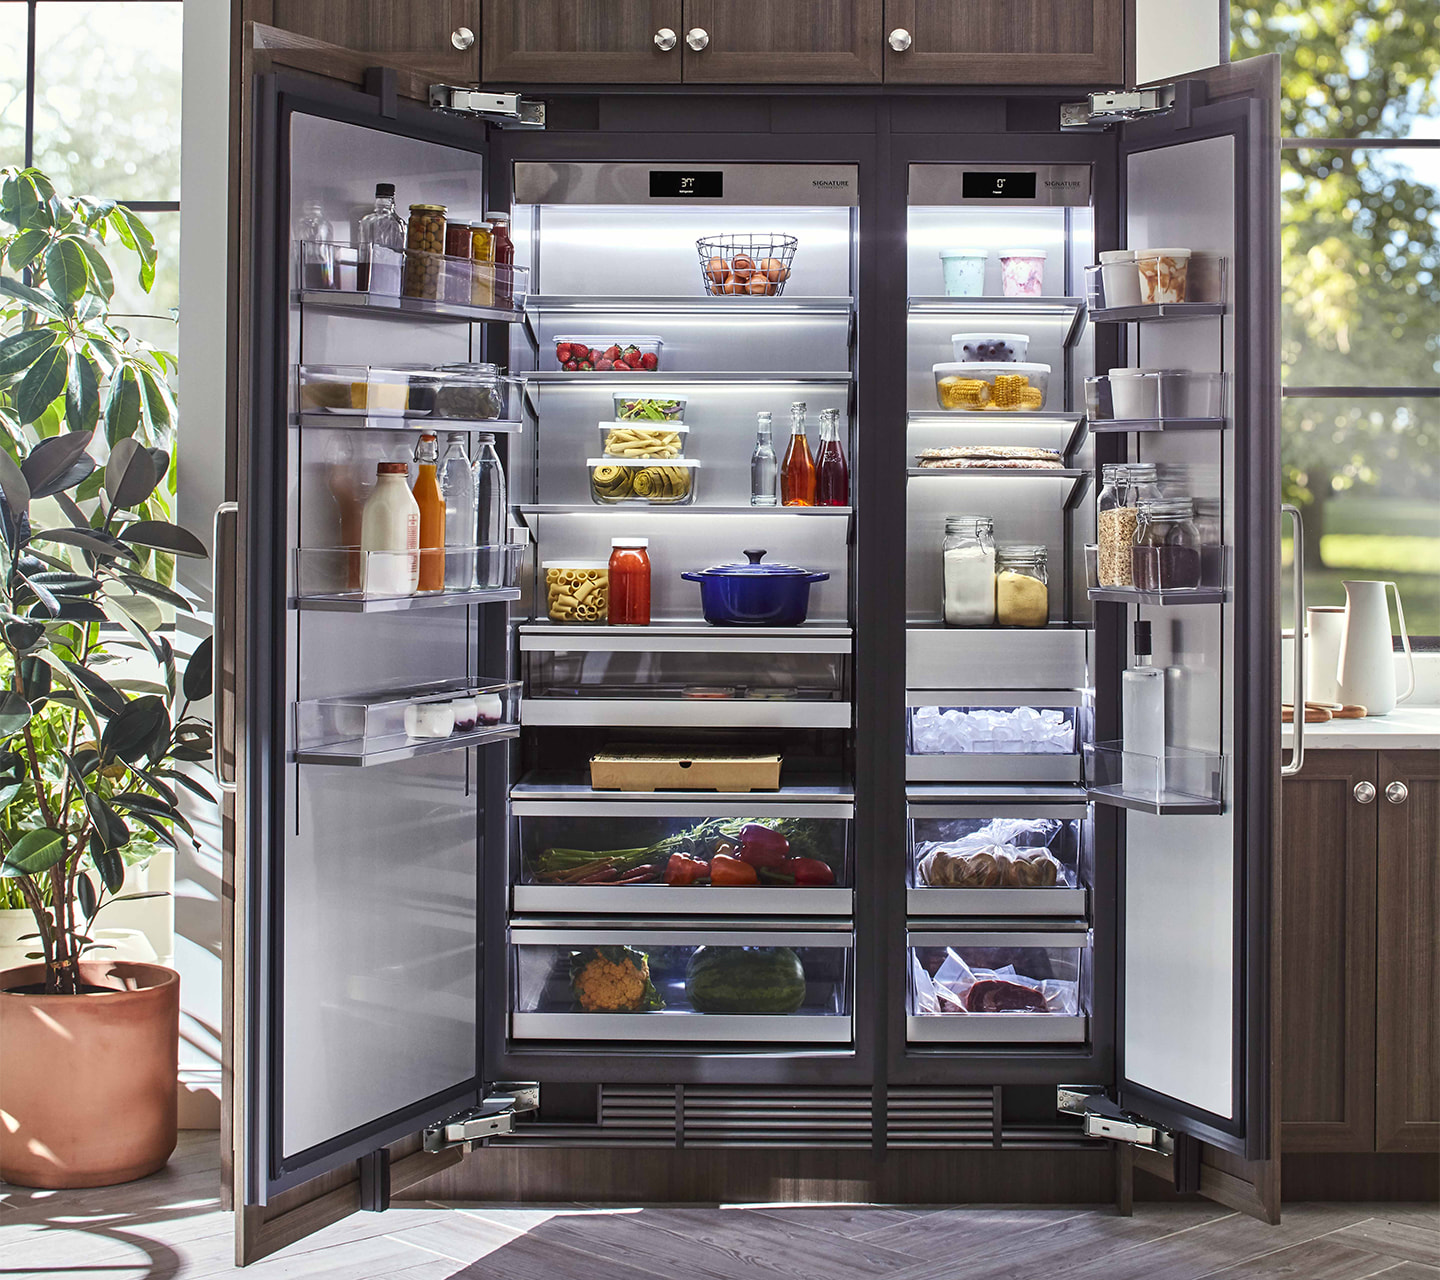 What Refrigerator Brand Is The Most Reliable Ratedrecommendation.com  